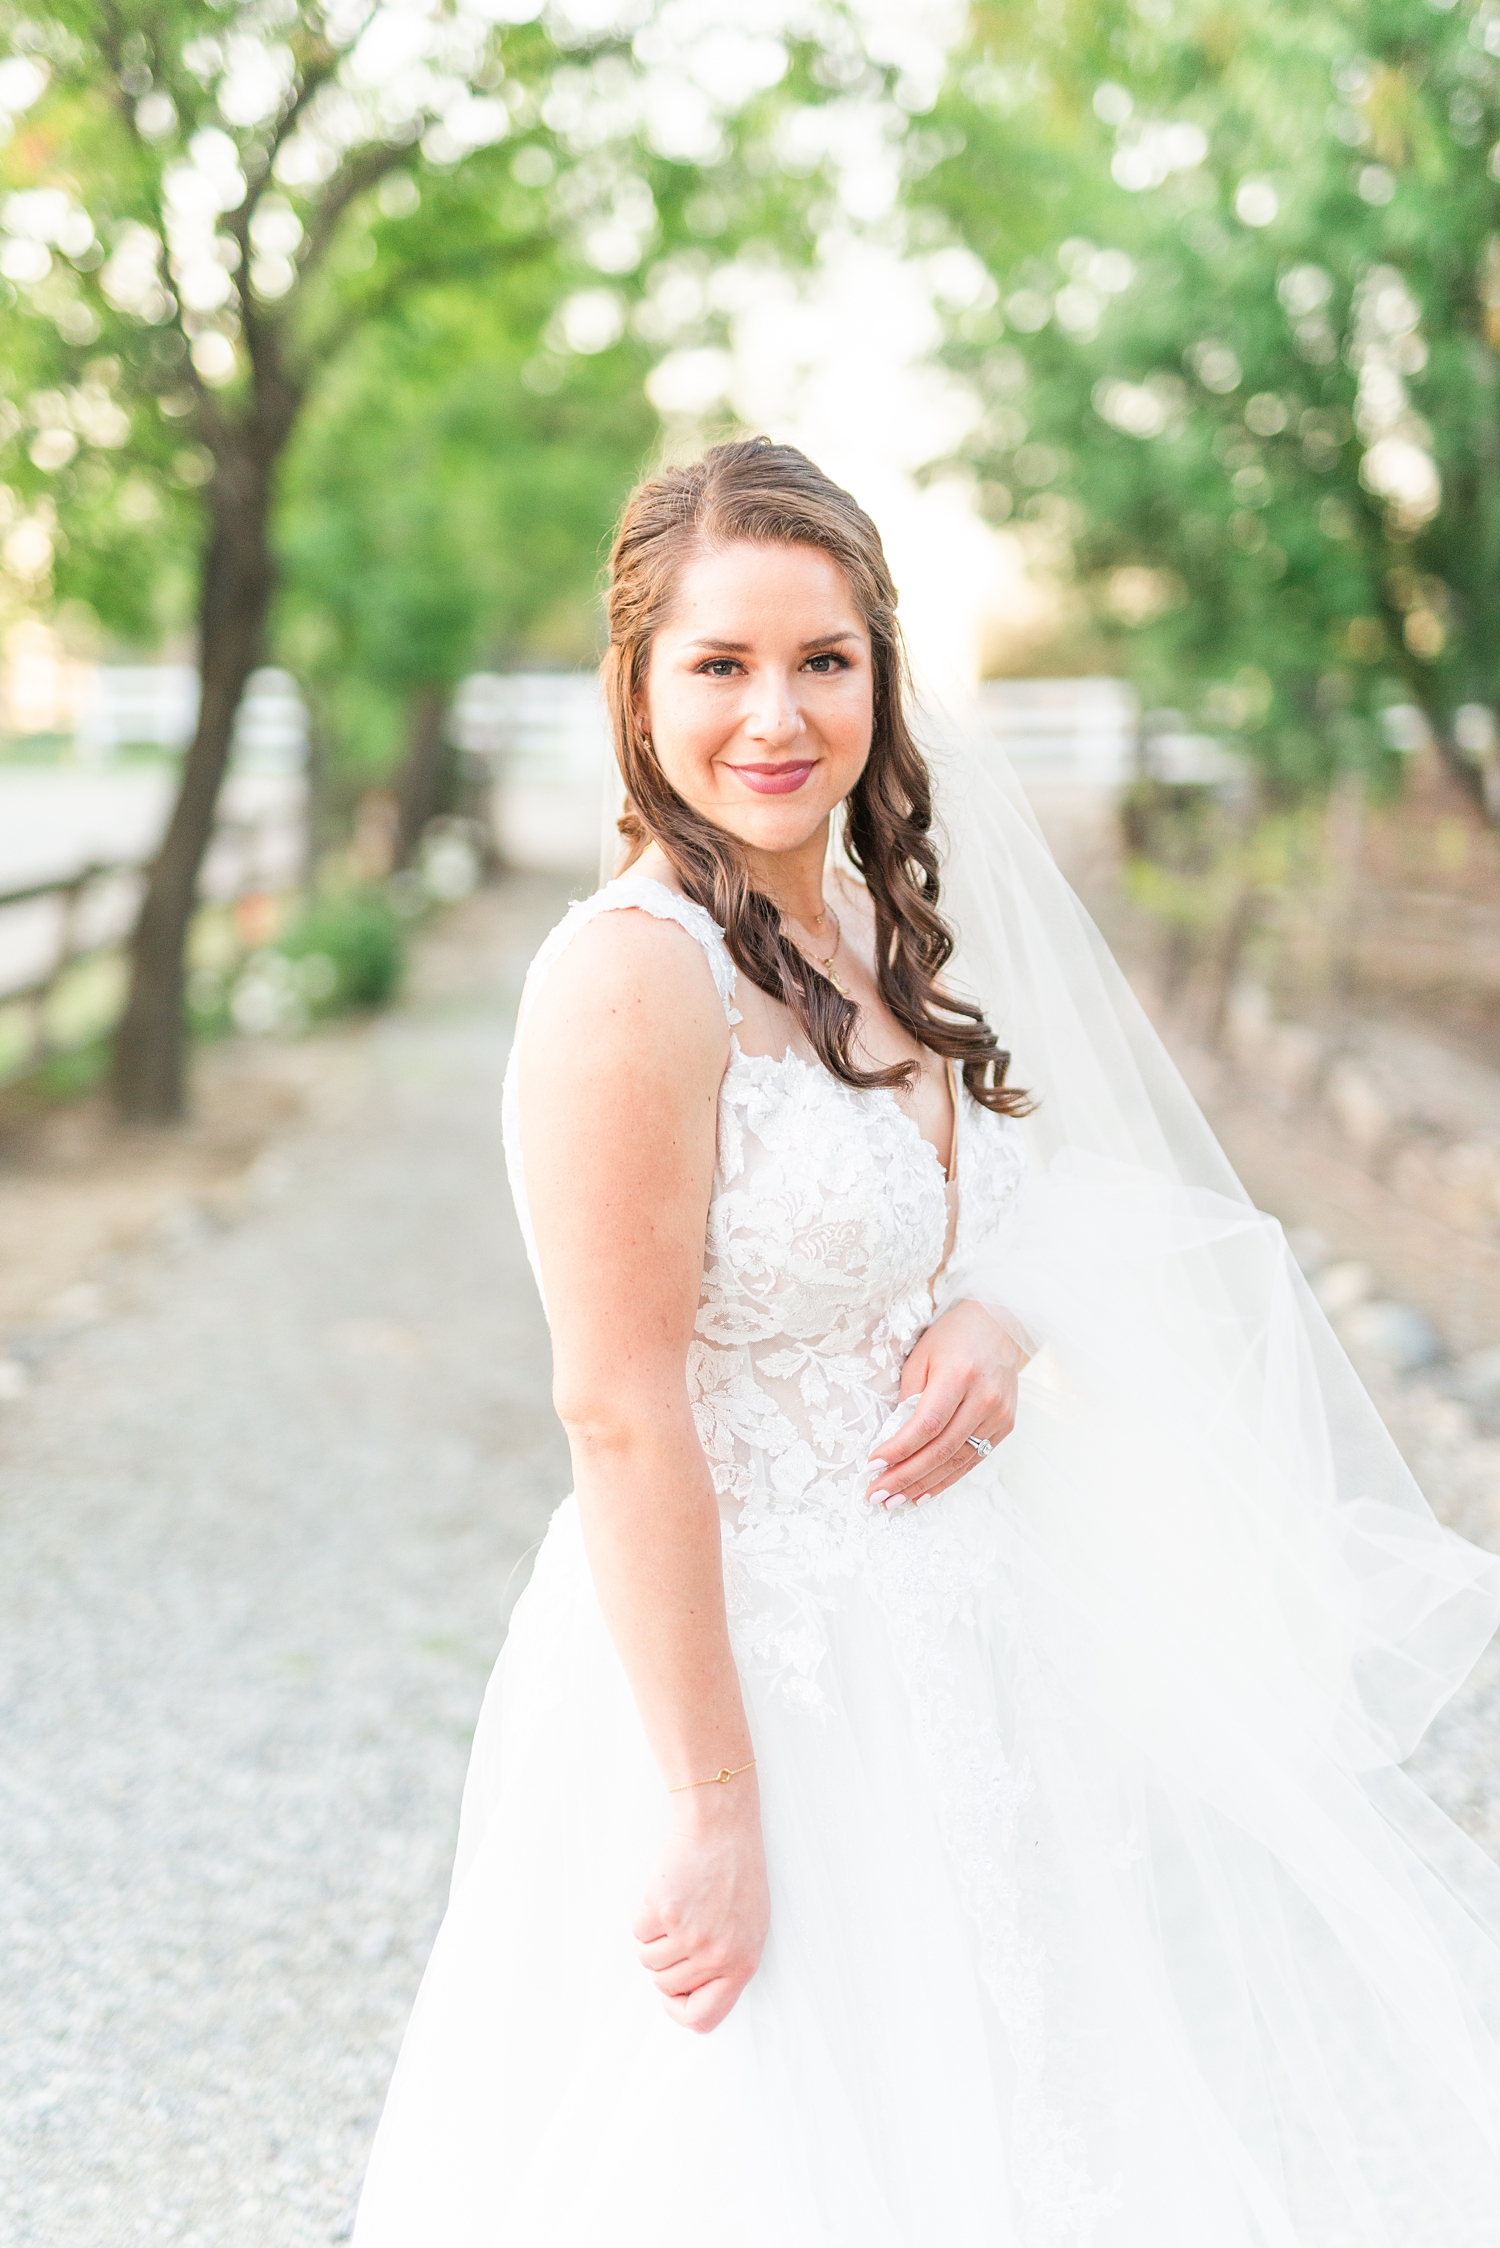 Bridal Session in a winery in temecula from a Temecula Wedding Photographer_0023.jpg